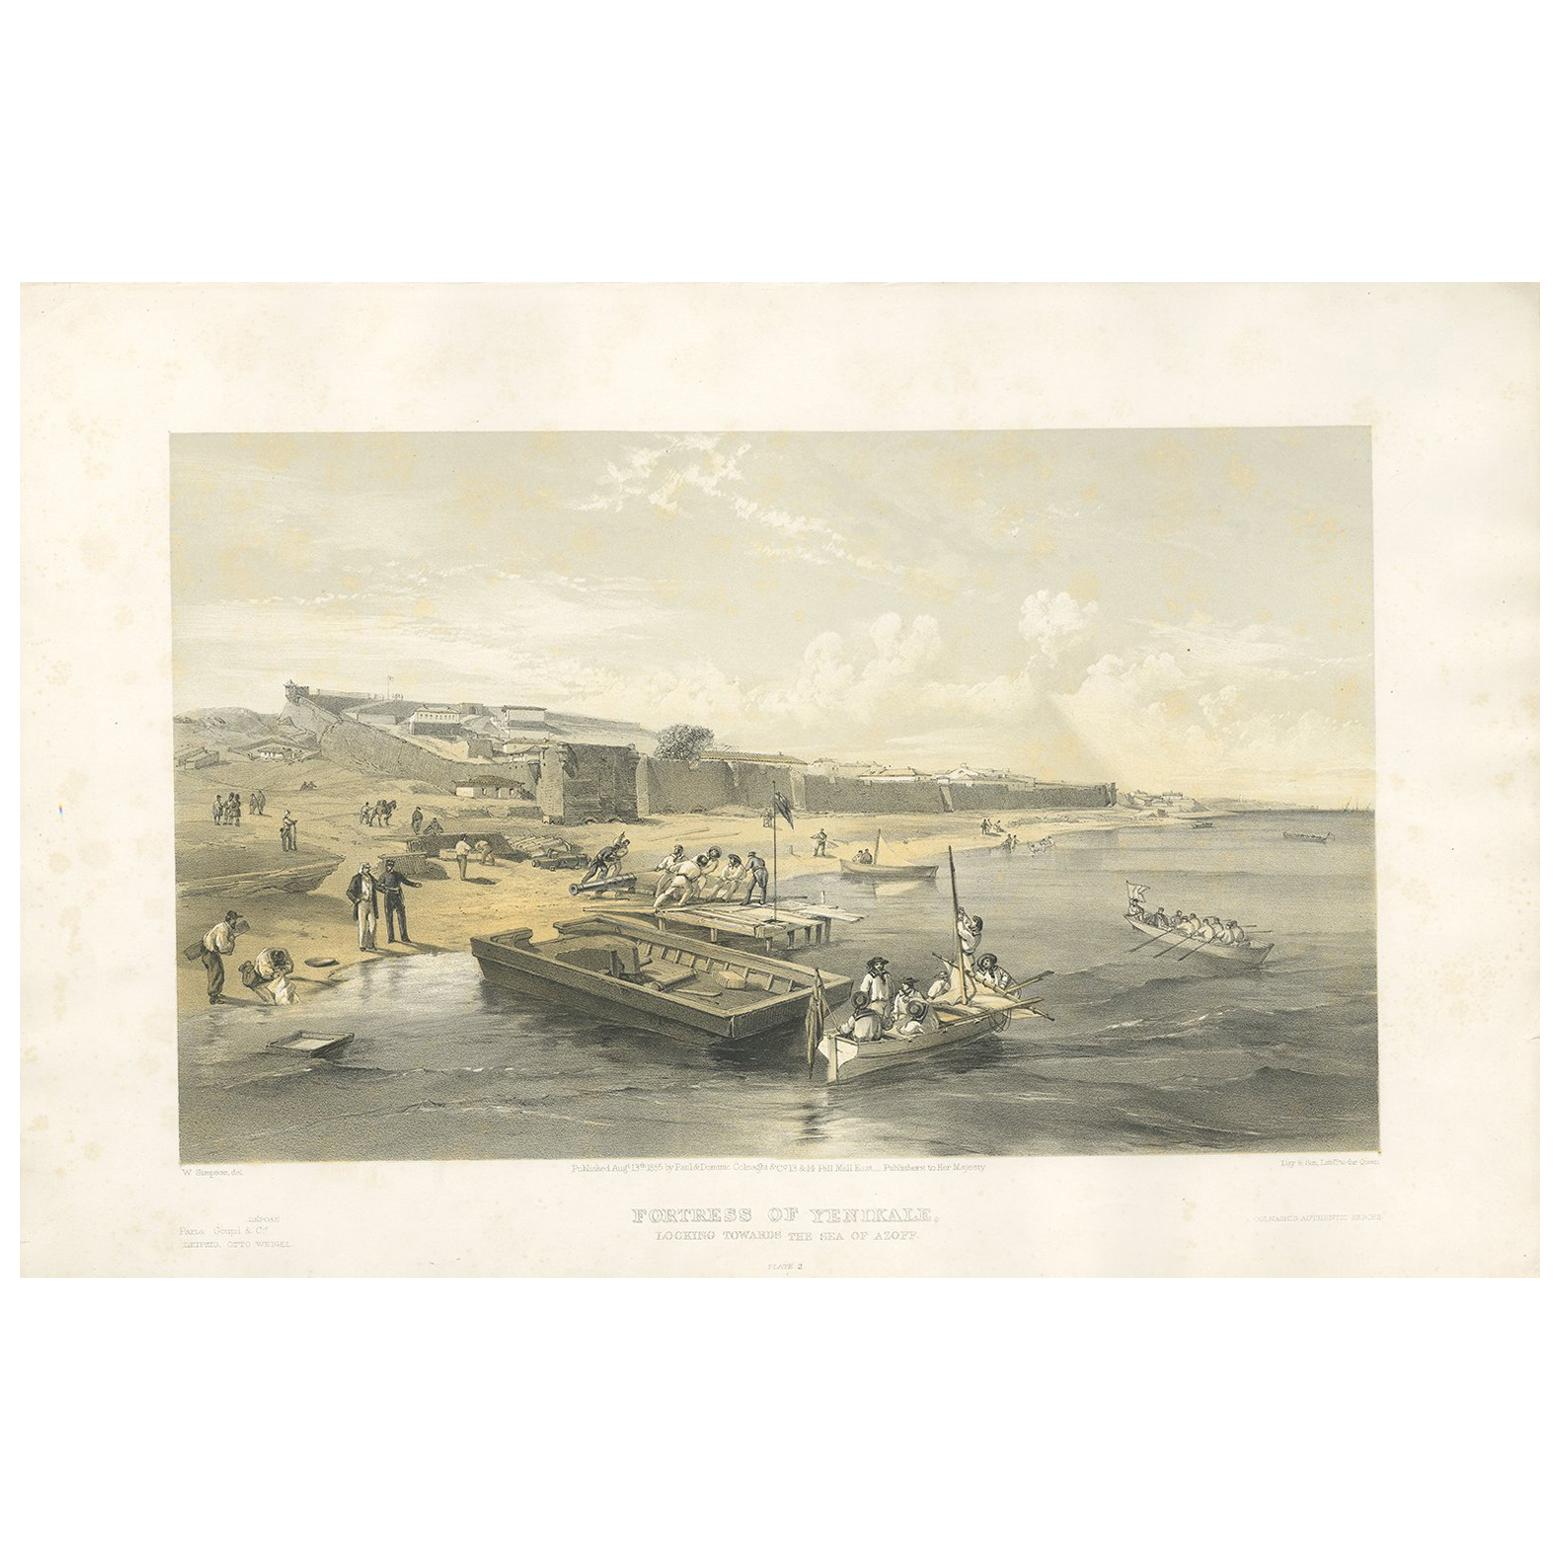 Antique Print of the Fortress of Yenikale 'Crimean War' by W. Simpson, 1855